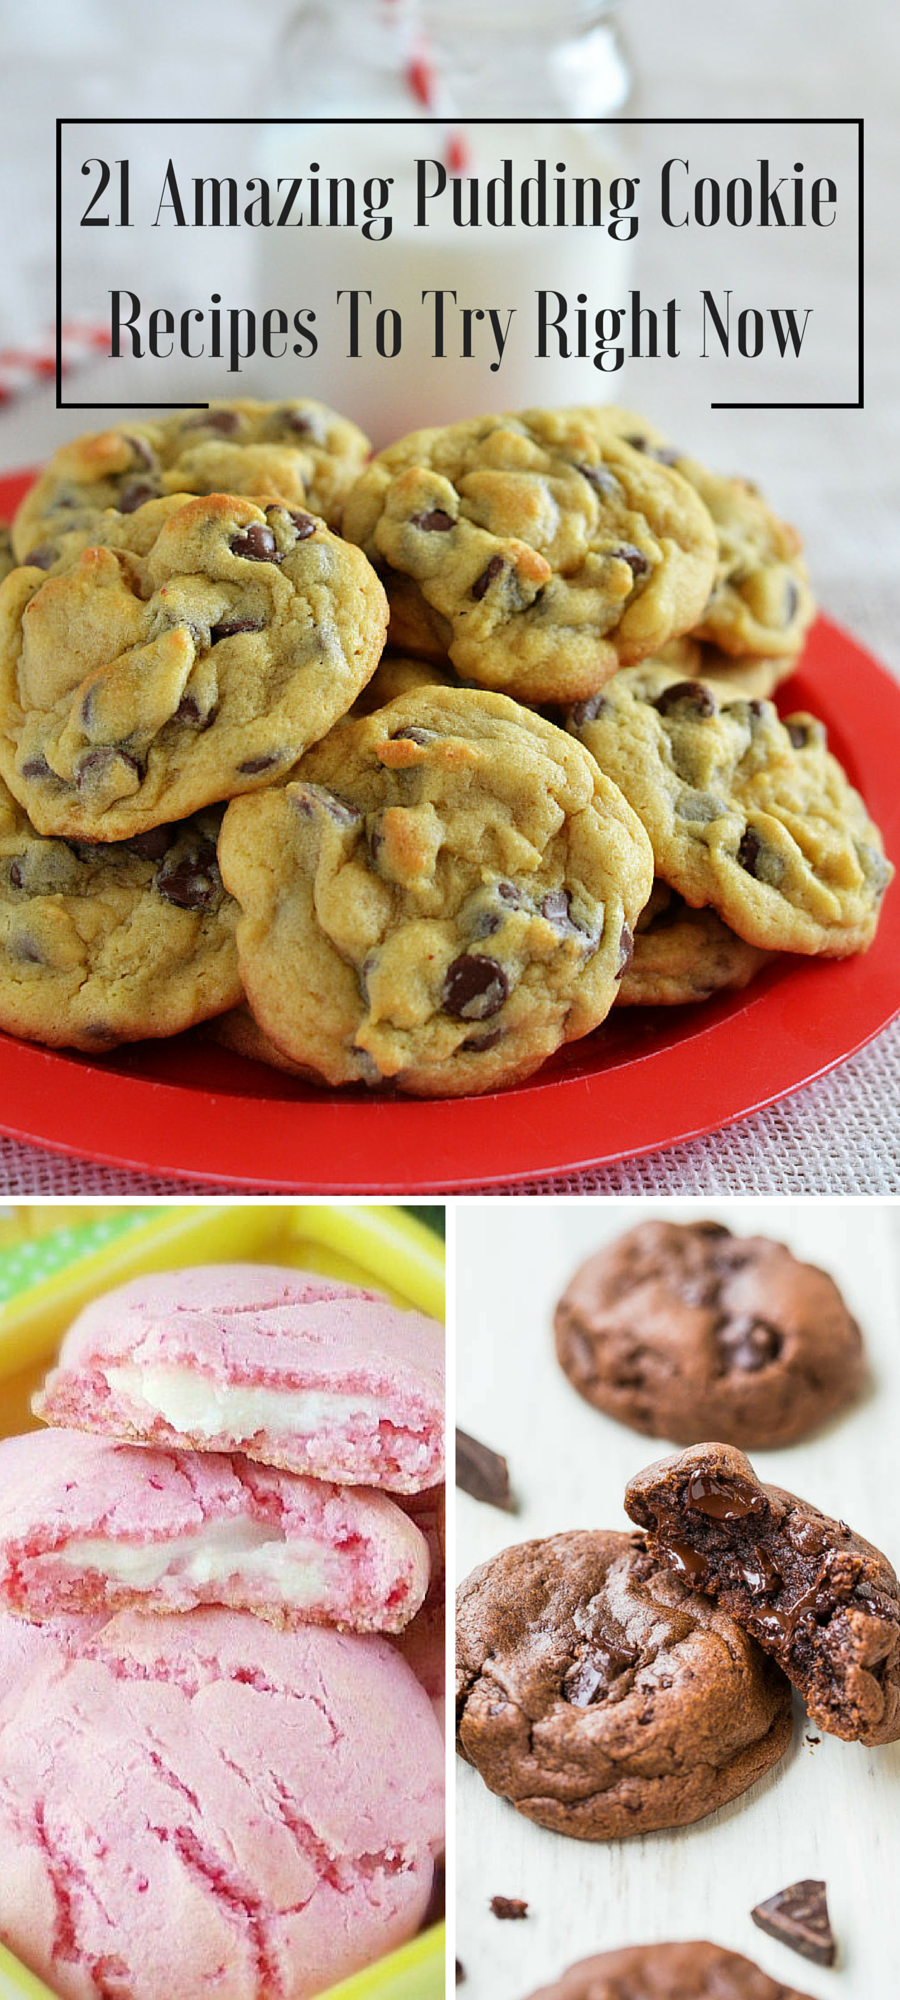 Take your cookies to the next level with 21 amazing pudding cookie recipes to try right now!